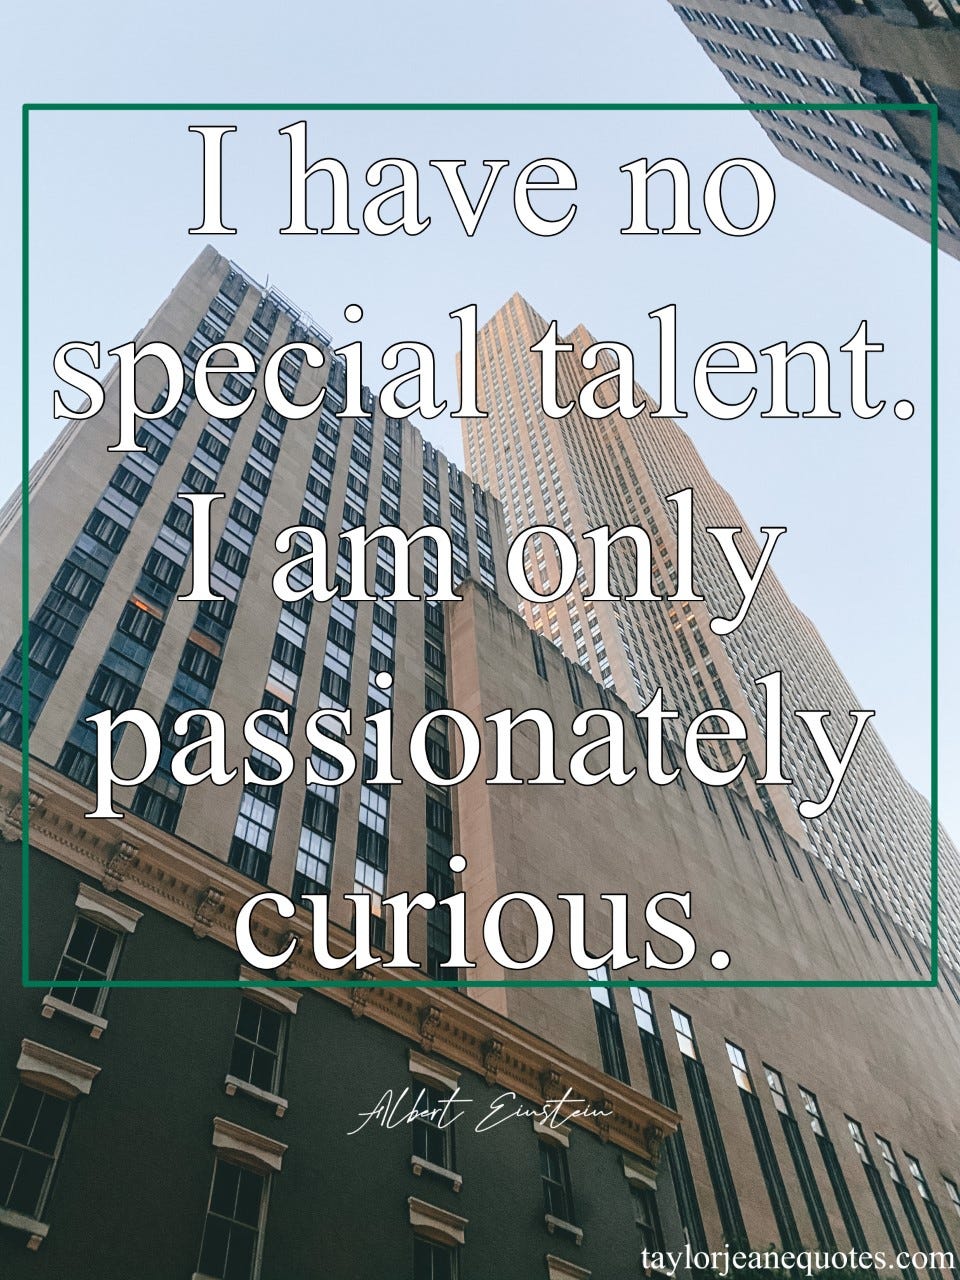 taylor jeane quotes, taylor jeane, taylor wilson, quote of the day, quotes, albert einstein, albert einstein quotes, passion quotes, talent quotes, curiosity quotes, motivational quotes, positive quotes, inspirational quotes, positive quotes, life quotes, uplifting quotes, empowering quotes